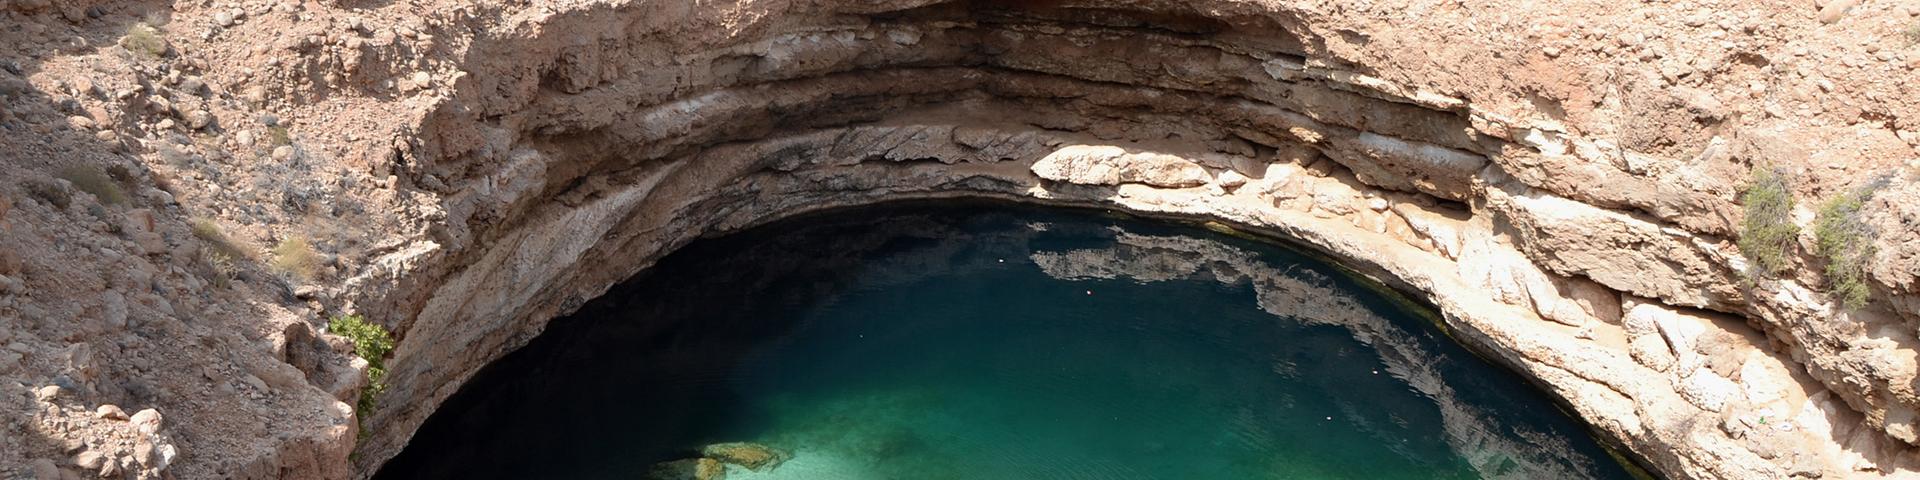 The blue-green water in this limestone formation, Oman 